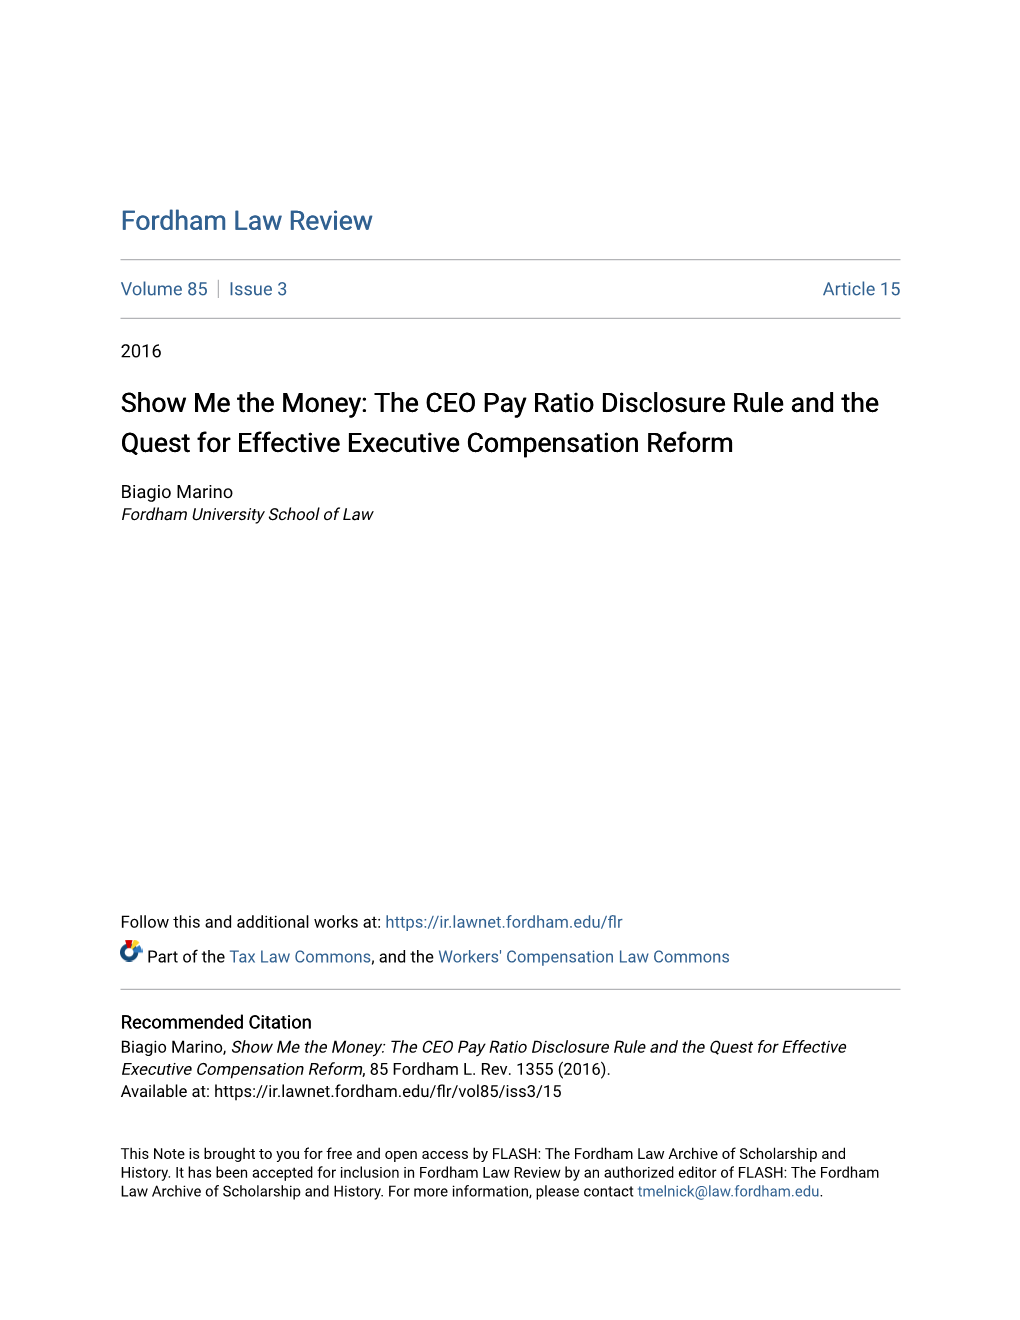 The CEO Pay Ratio Disclosure Rule and the Quest for Effective Executive Compensation Reform